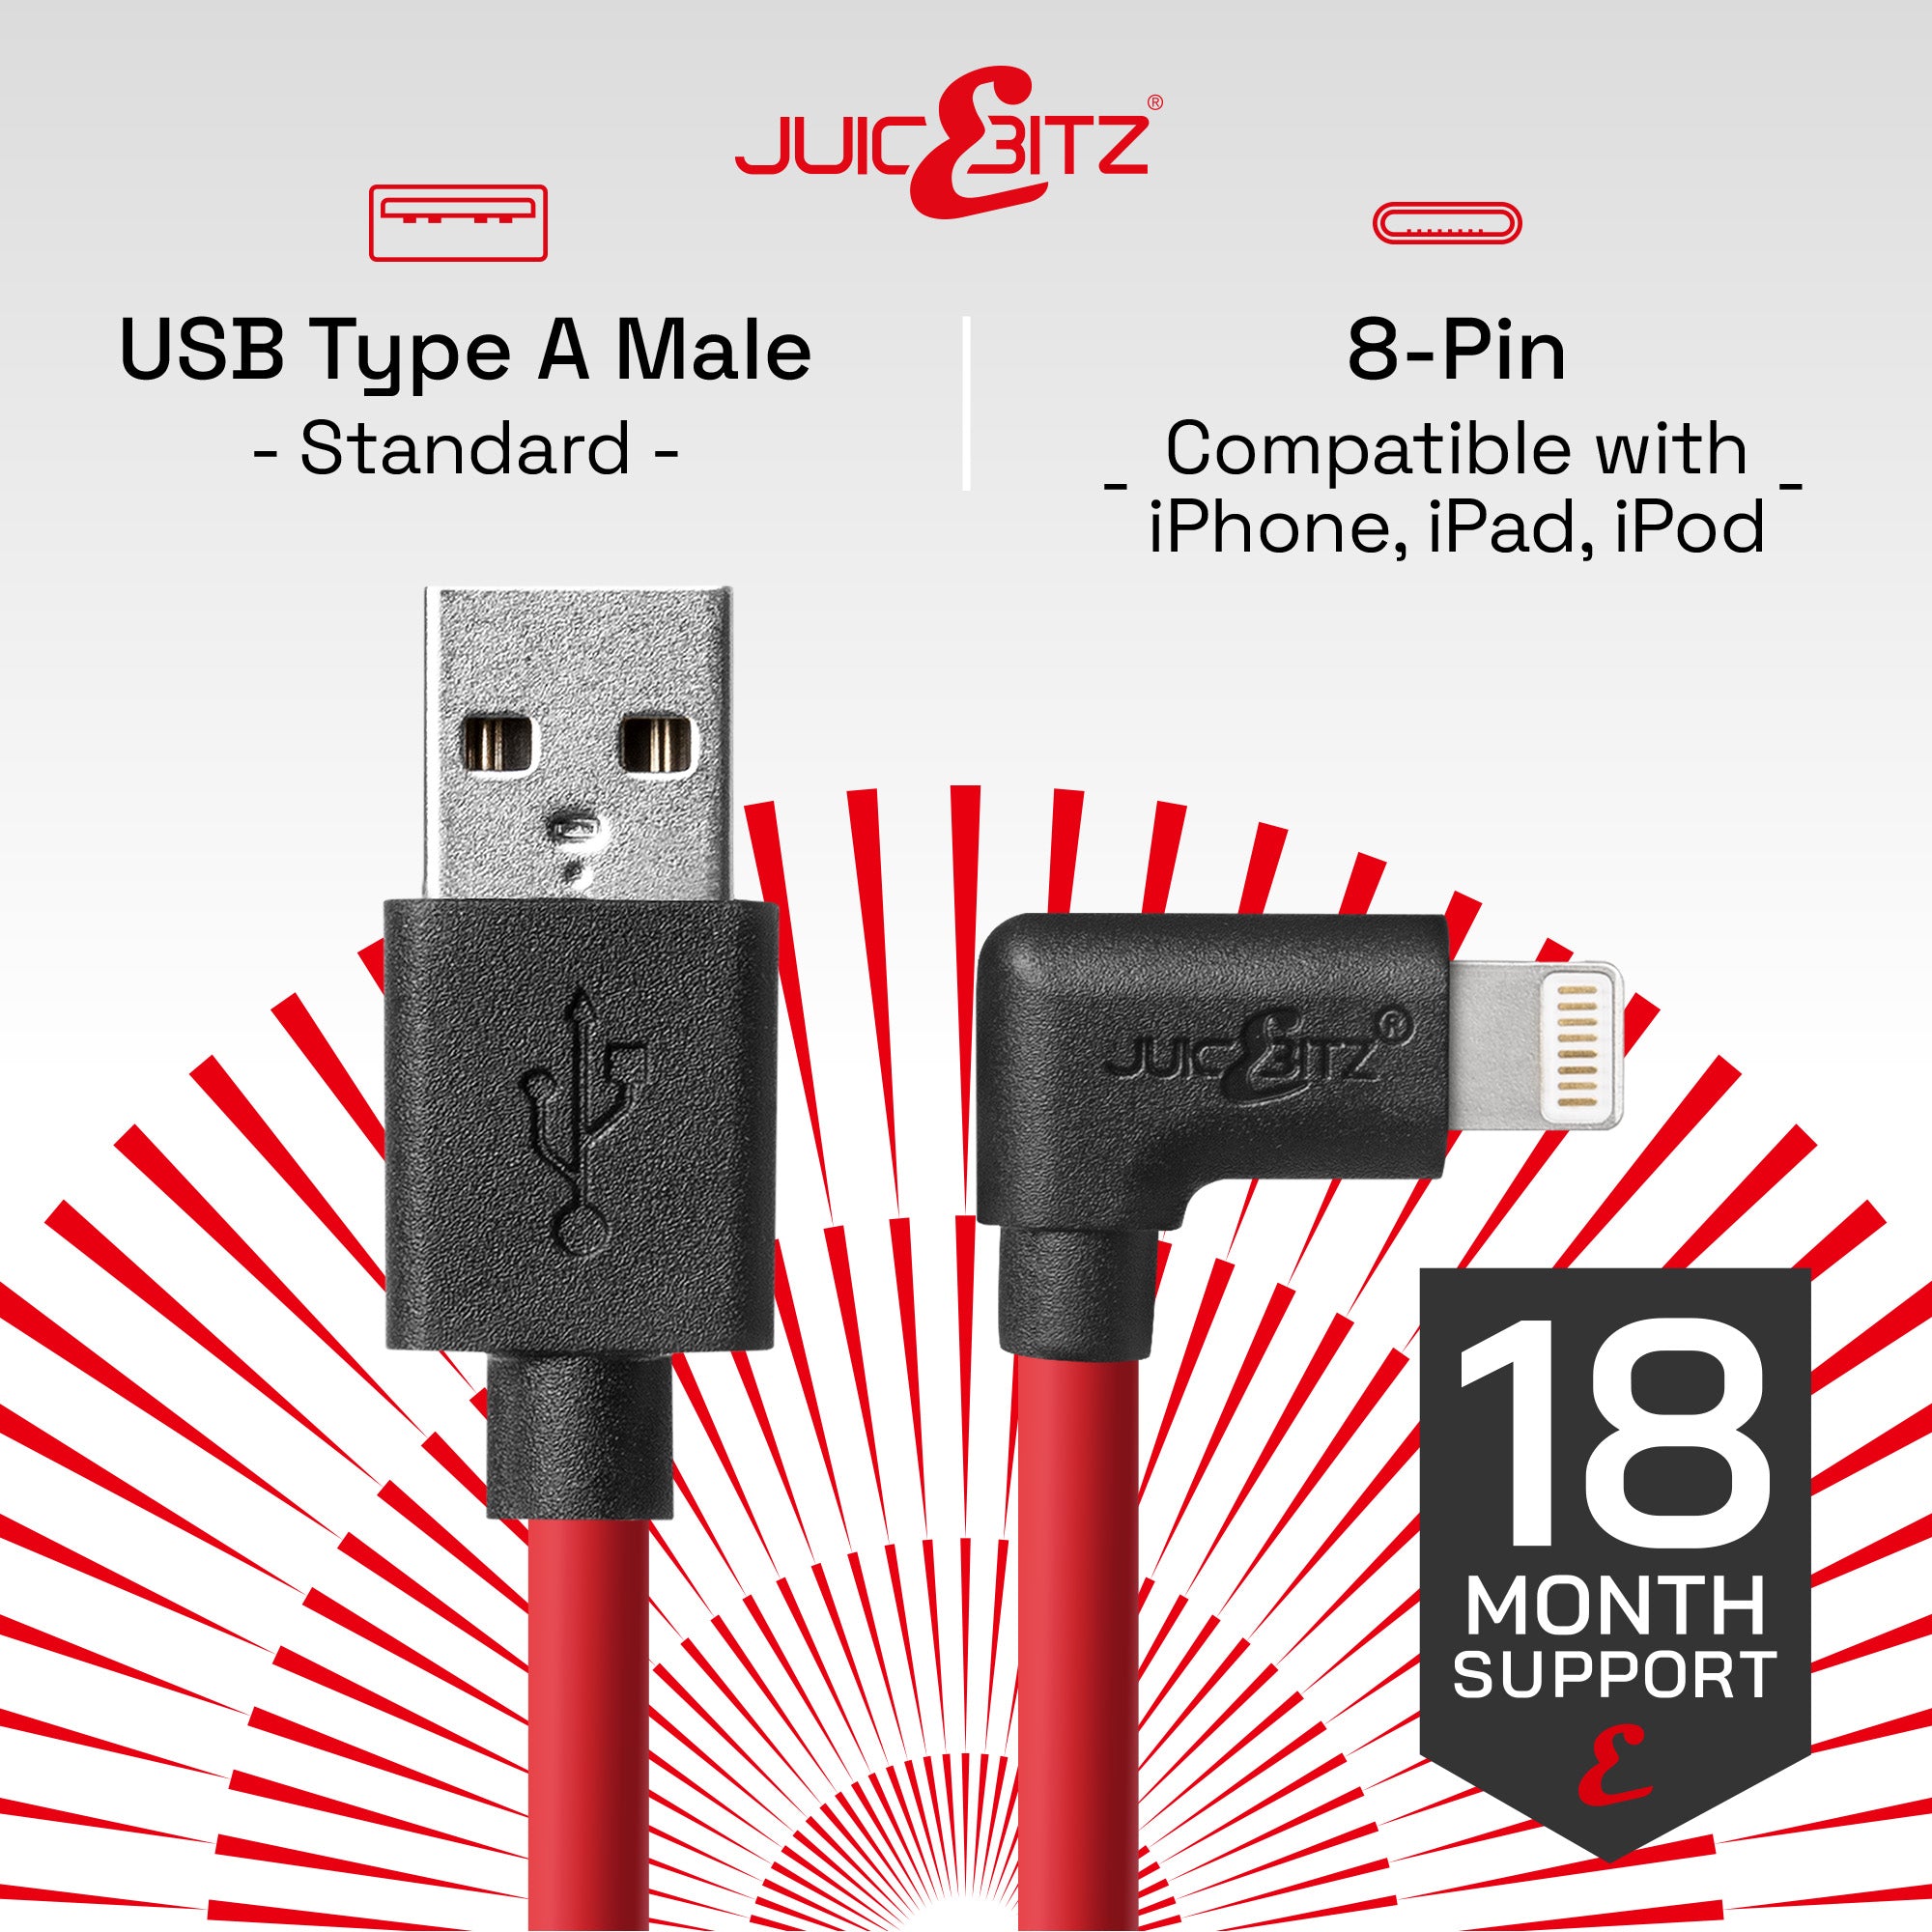 Heavy Duty Angled USB Charger Cable Data Sync Lead for iPhone, iPad, iPod - Red